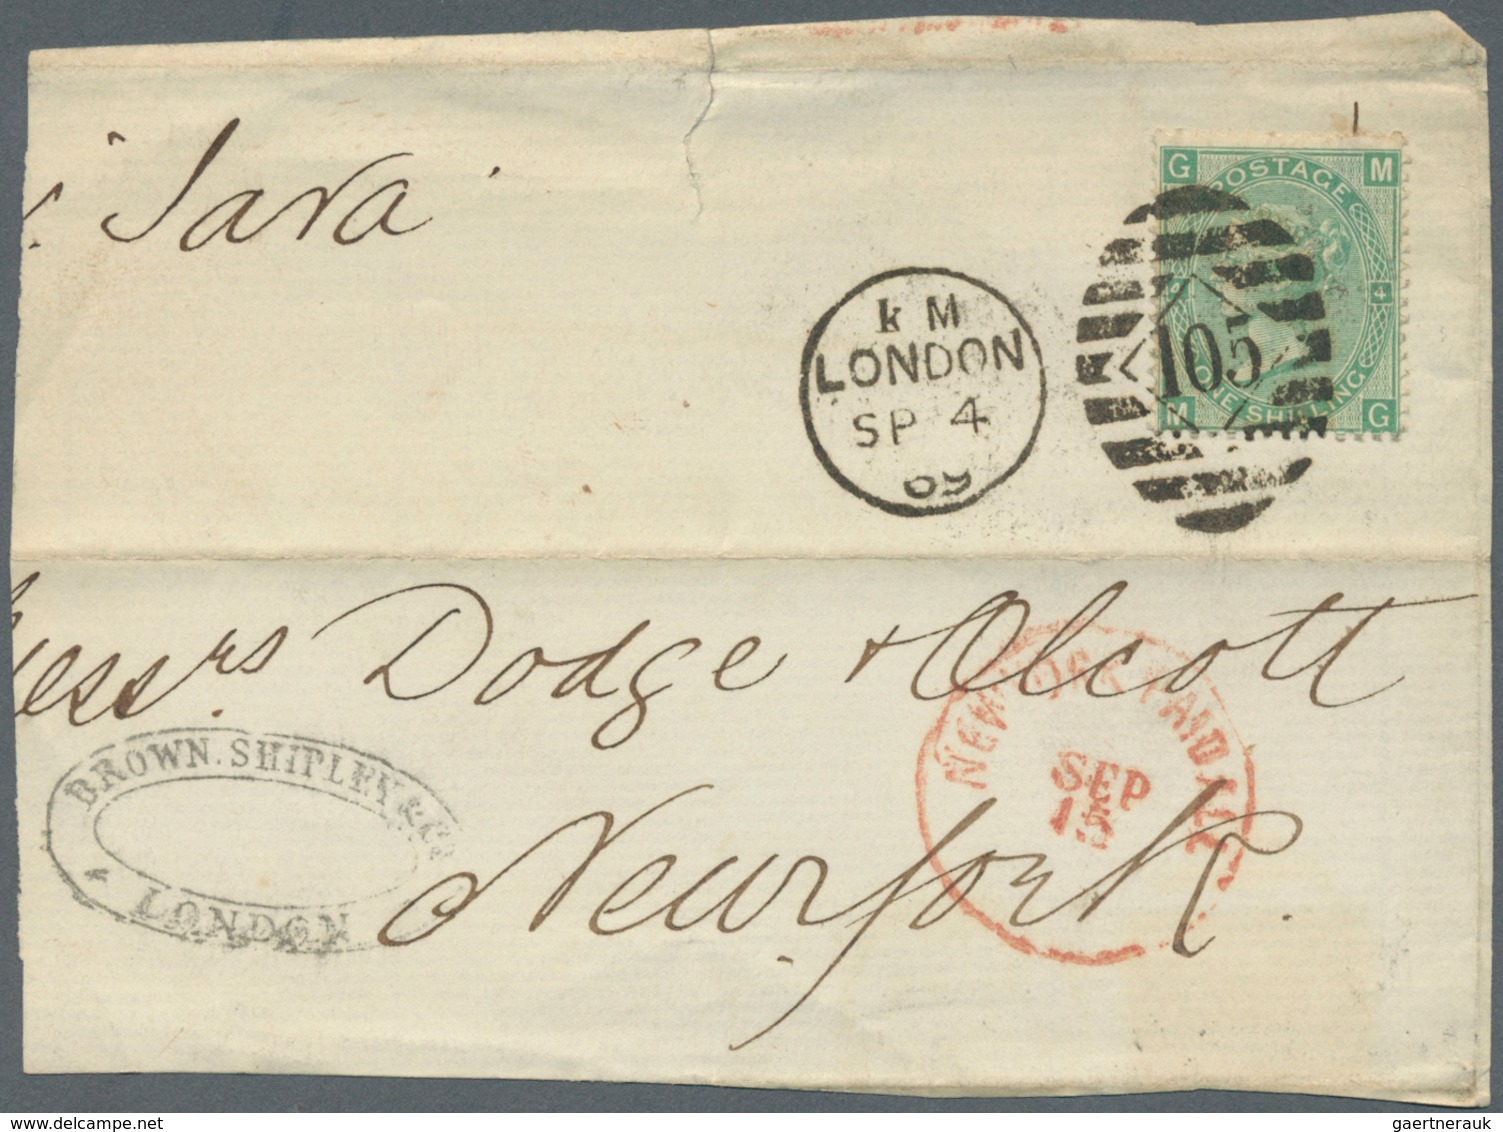 Großbritannien: 1865/1869, assortment of 74 fronts/large fragments each franked with 84 copies 1s. g